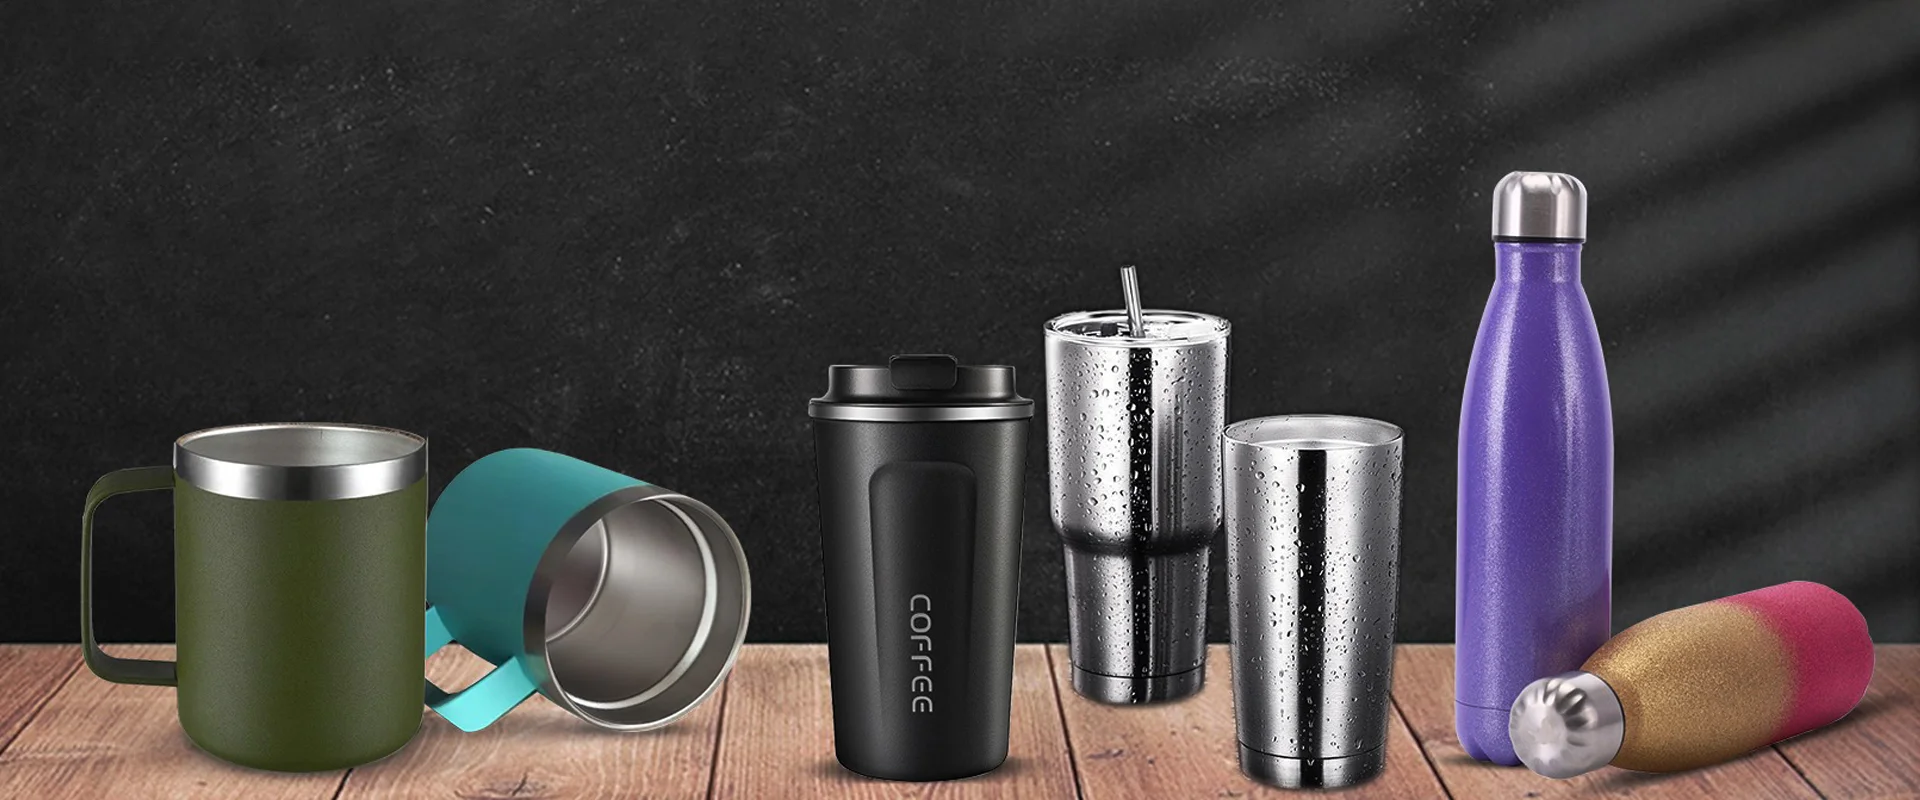 Stainless steel vacuum water bottle/tumbler manufacture